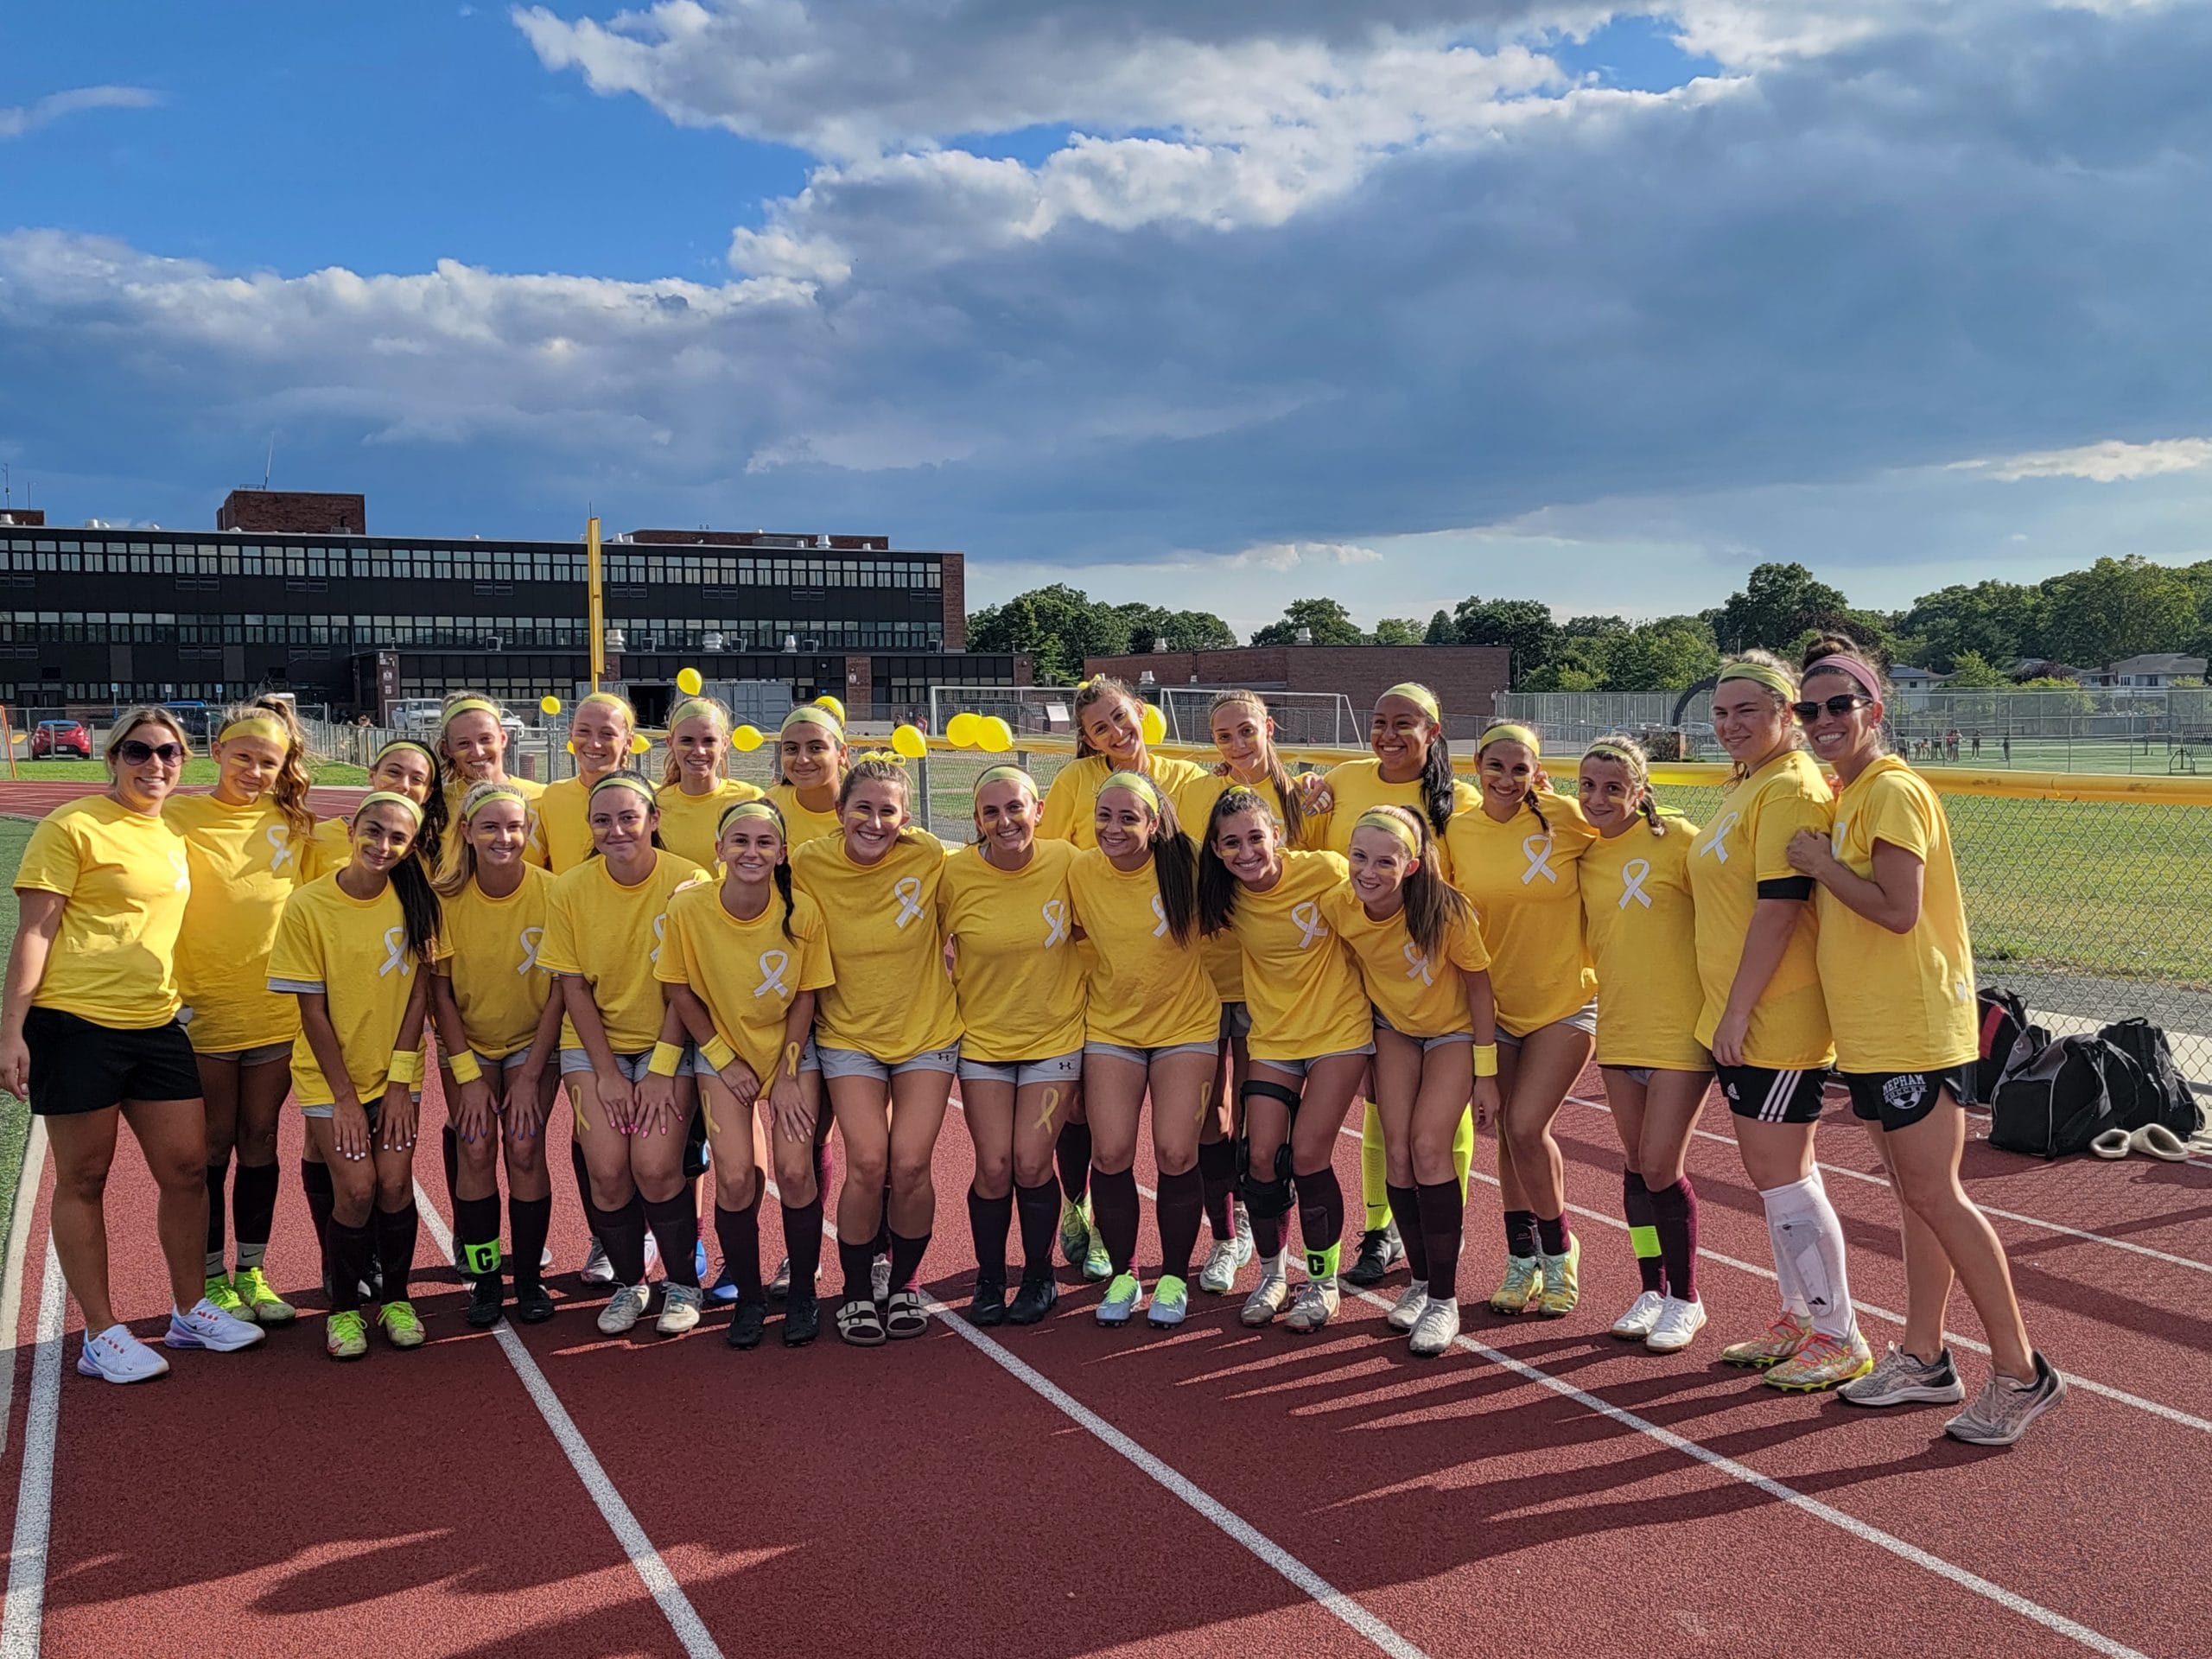 Mepham Athletes Bring Cancer Awareness Fundraising To The Field